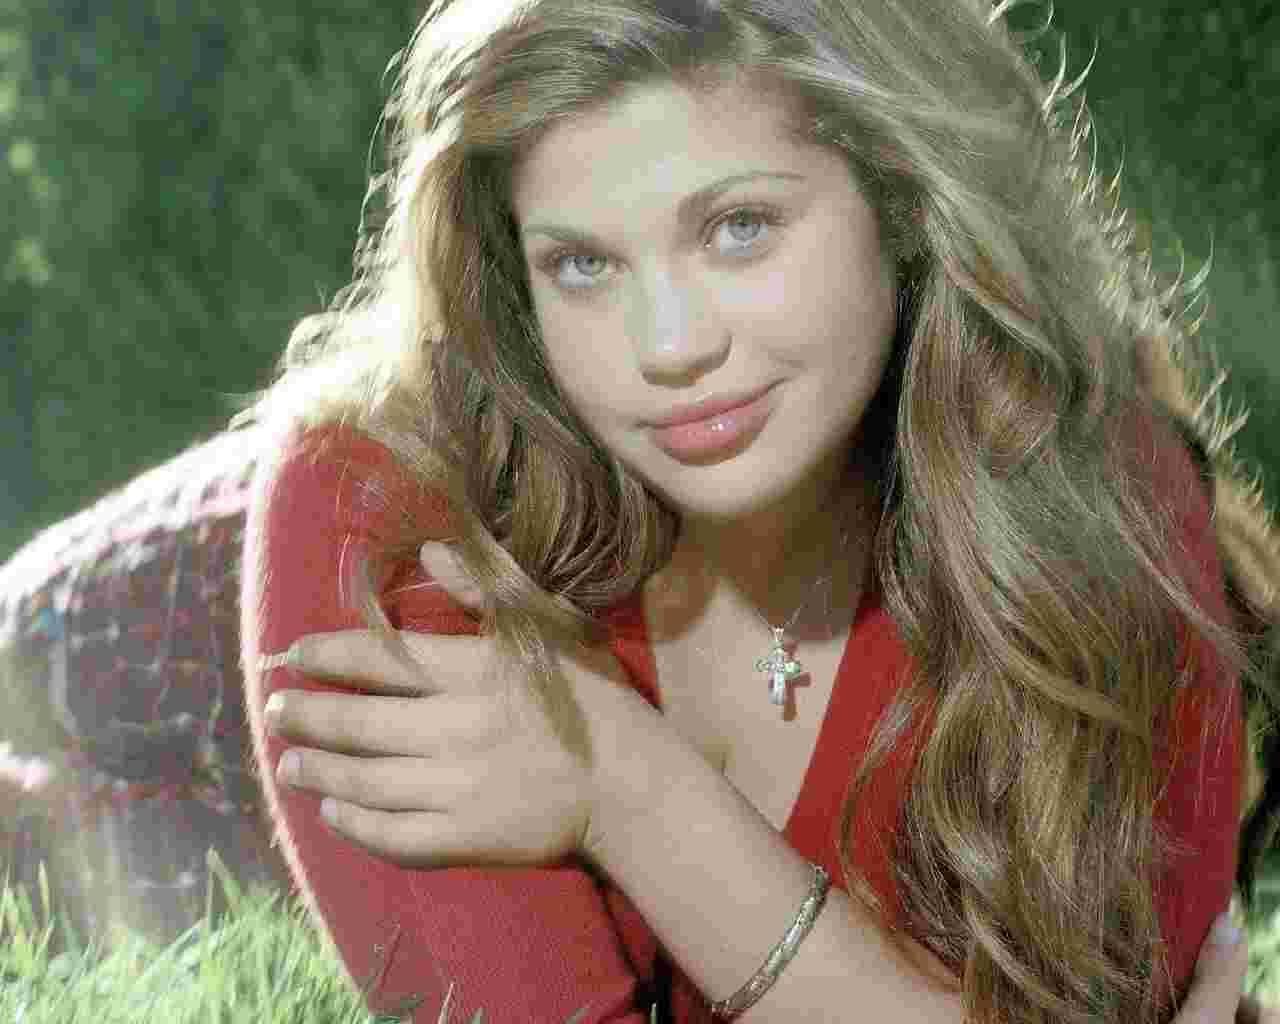 Pictures of Danielle Fishel, Picture #166536 - Pictures Of Celebrities